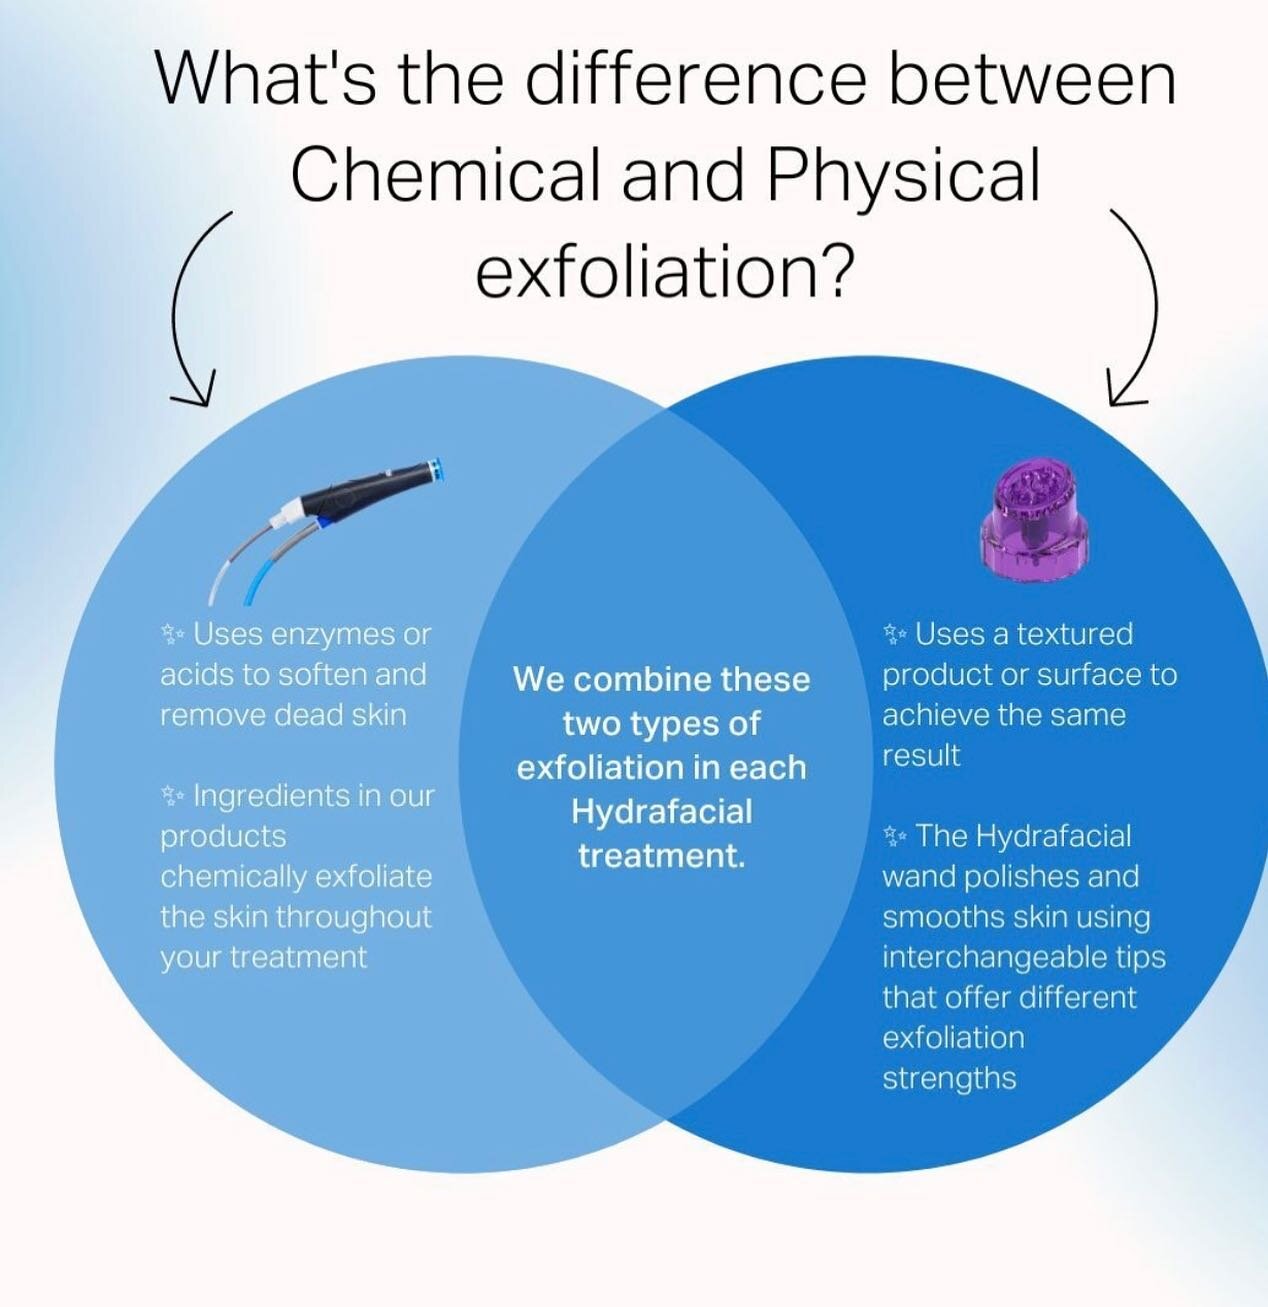 Exfoliating is one of the easiest ways to get brighter, smoother, softer looking skin. Not only does it help with cell turnover; it also allows your serums and moisturizers to sink into your skin a whole lot better.

Both chemical and physical exfoli